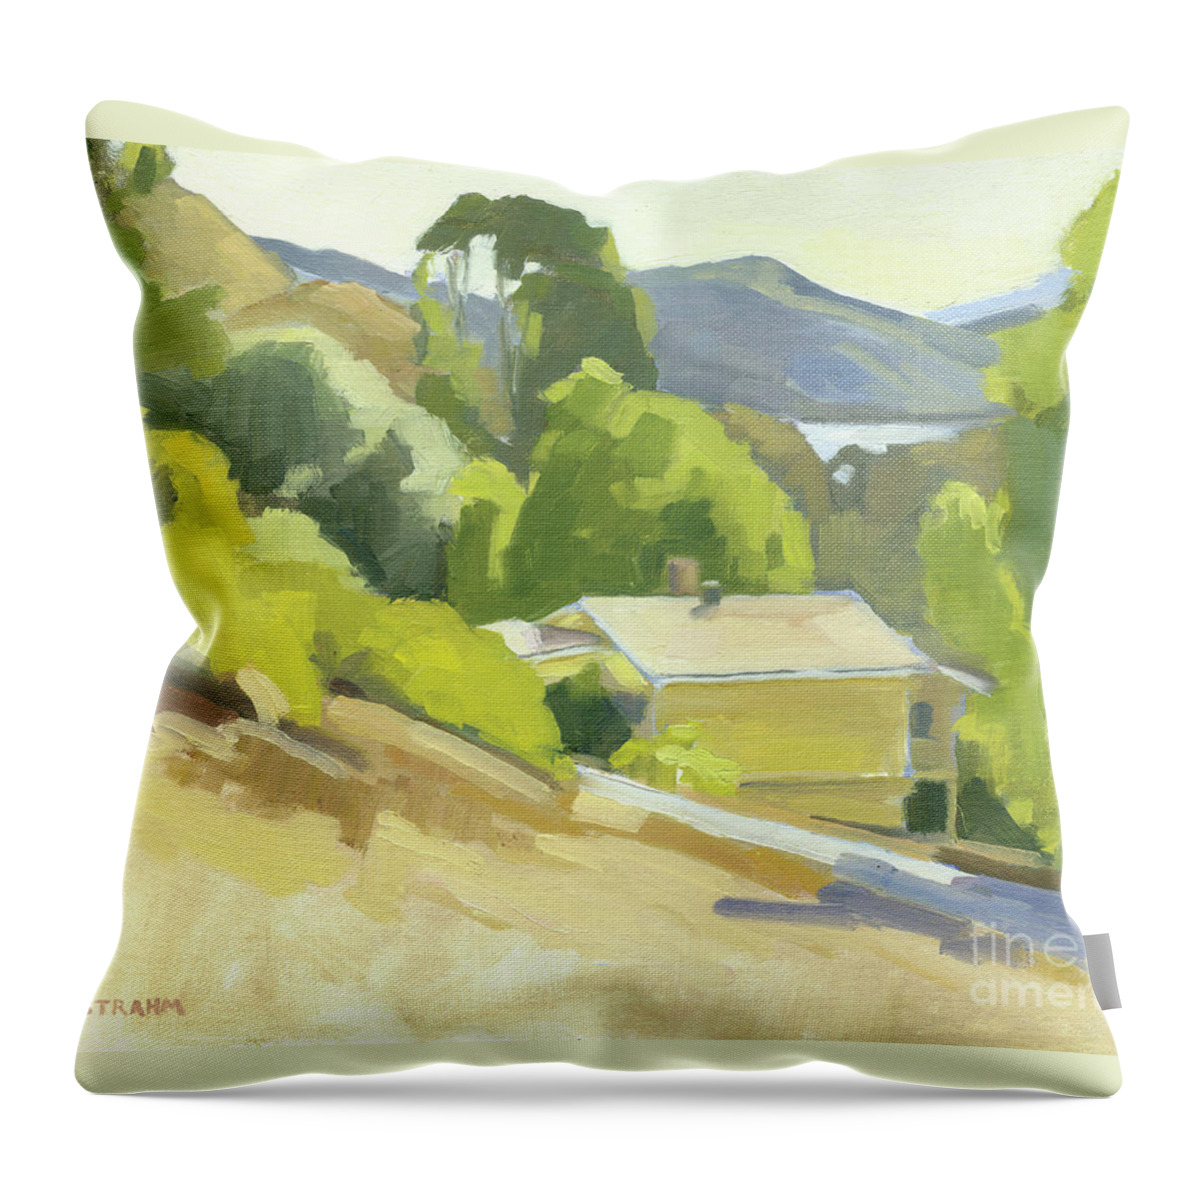 Lake Throw Pillow featuring the painting Del Dios, Lake Hodges - Escondido, California by Paul Strahm